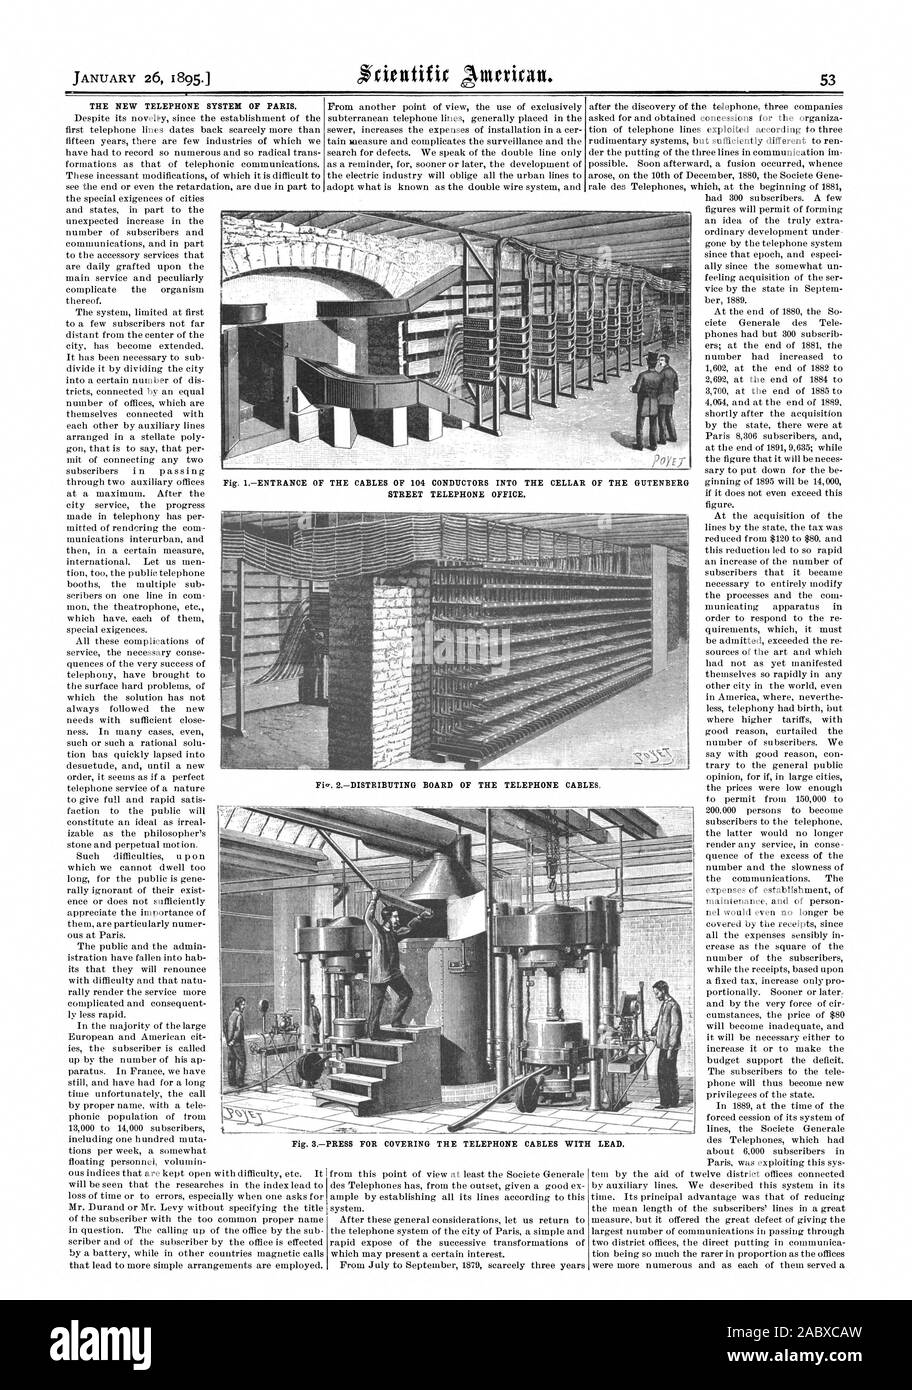 THE NEW TELEPHONE SYSTEM OF PARIS.  Fig. 3PRESS FOR COVERING THE TELEPHONE CABLES WITH LEAD., scientific american, 1895-01-26 Stock Photo